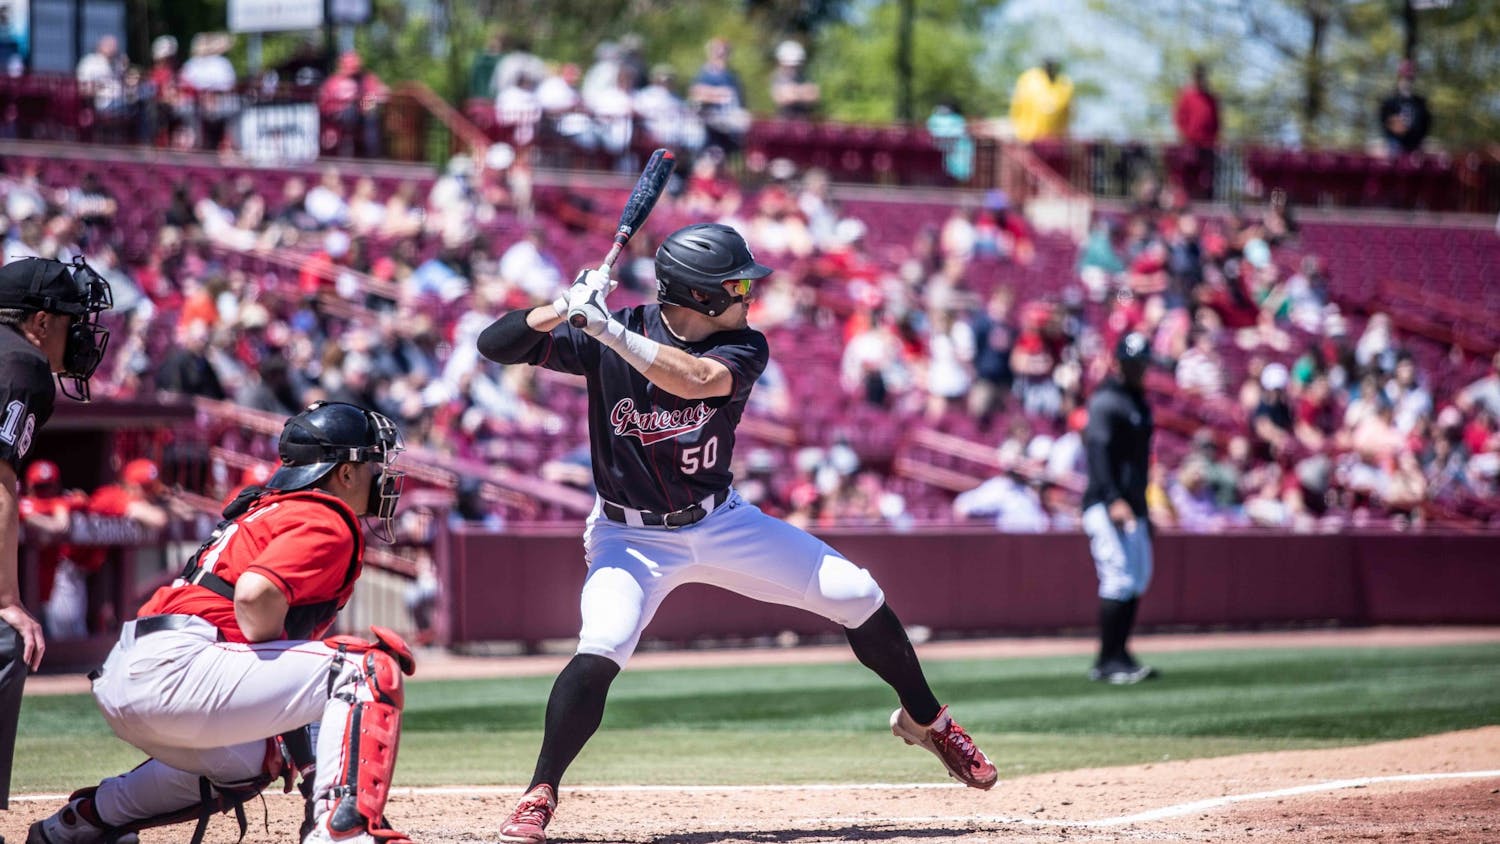 Senior infielder Kevin Madden gets ready to bat during a game against Georgia on Sunday, April 10, 2022 in Columbia, SC. The Gamecocks lost the series to Georgia 1-2. 